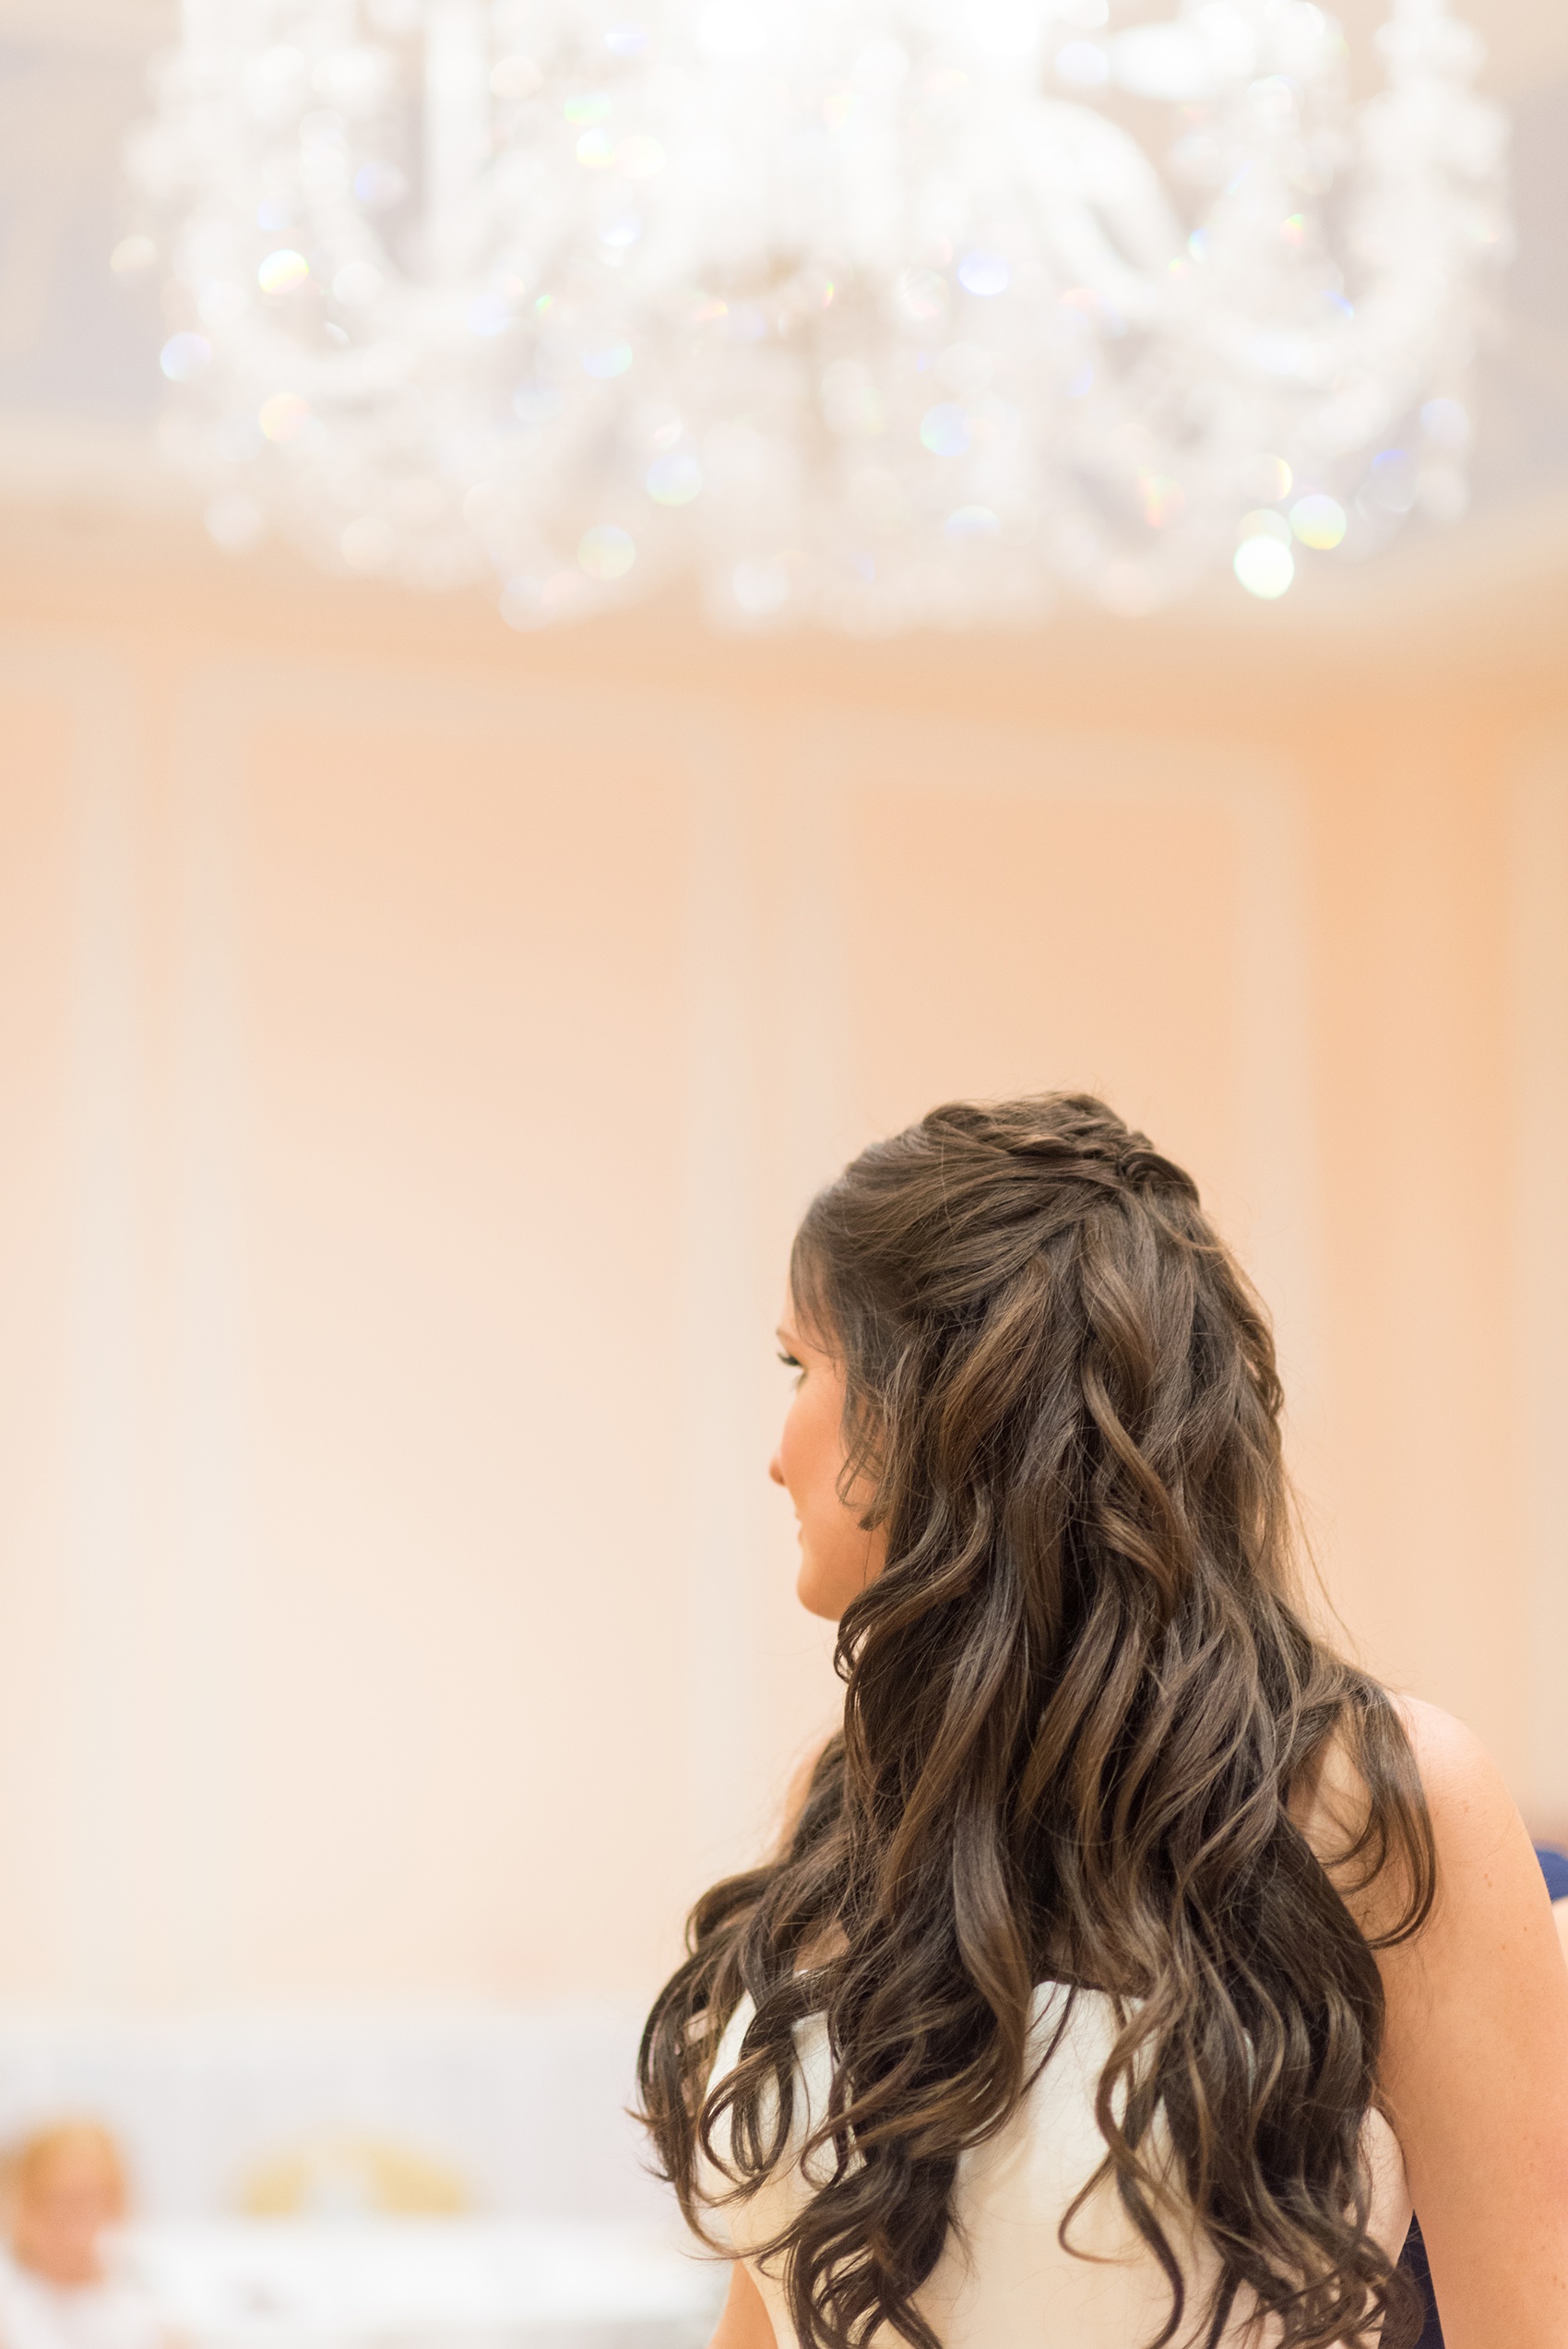 Photos of a fall wedding at The Carolina Inn, in Chapel Hill North Carolina, by Mikkel Paige Photography. This event venue doubles as a hotel for guests, who can enjoy a reception and ceremony indoors or outdoors. The bride wore her hair in a half up do with beach inspired waves. Click through to see inspiration from the entire wedding! Planner: @asouthernsoiree #thecarolinainn #ChapelHillWeddings #MikkelPaige #ASouthernSoiree #bridehair #bridestyle